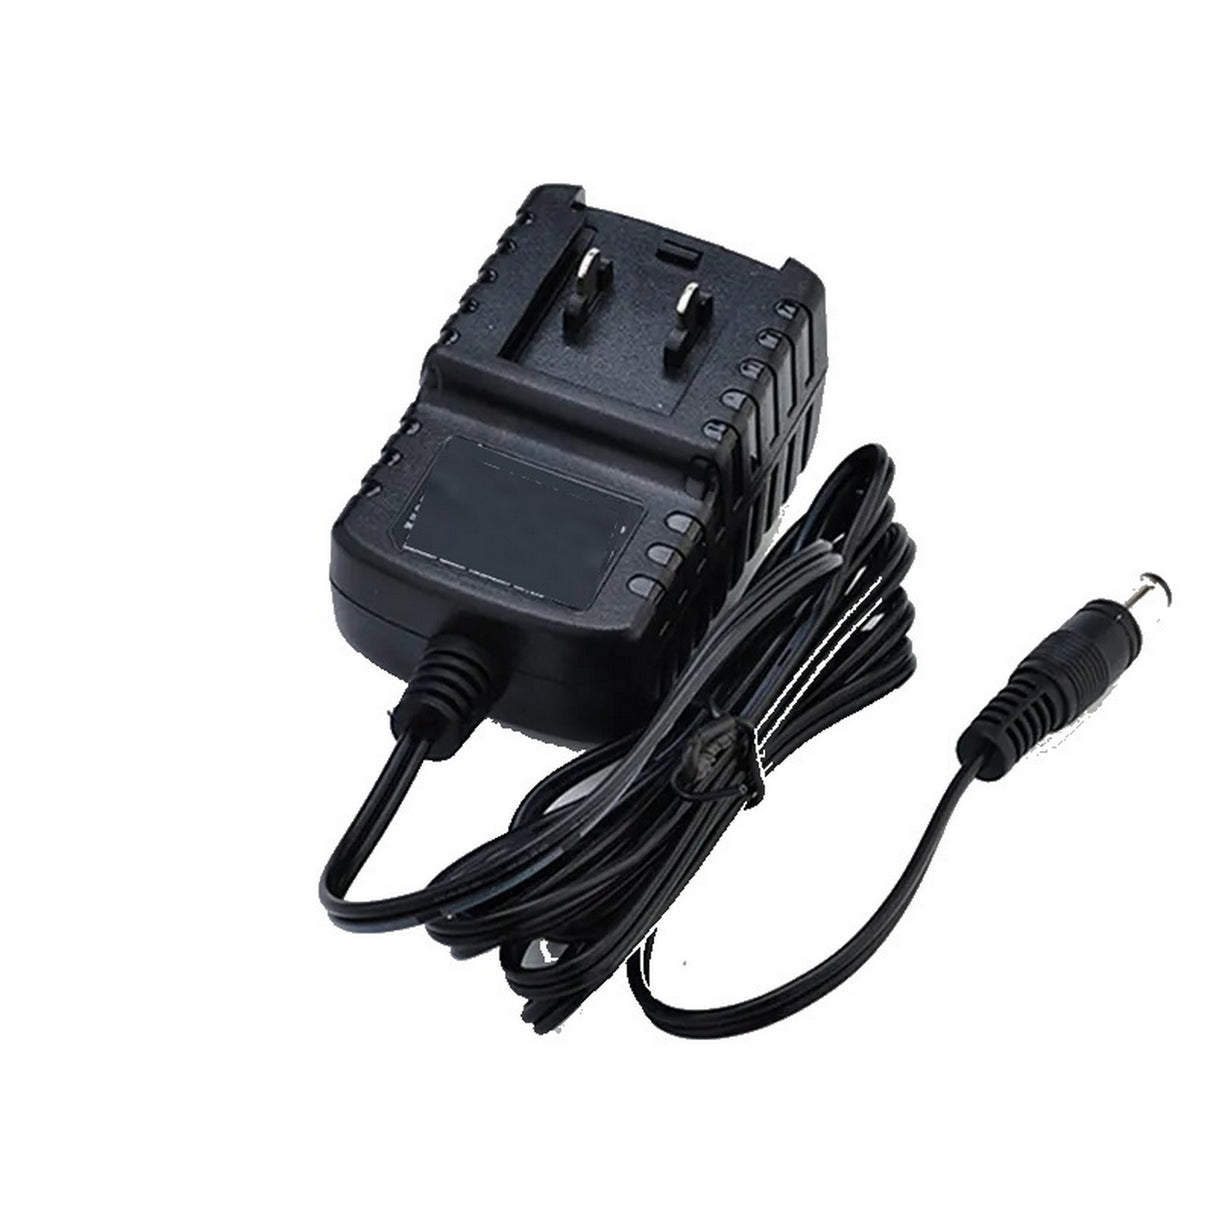 Elmo 5ZA0000512-1 Replacement AC Adapter for MX-P, MX-P2, and MX-P3